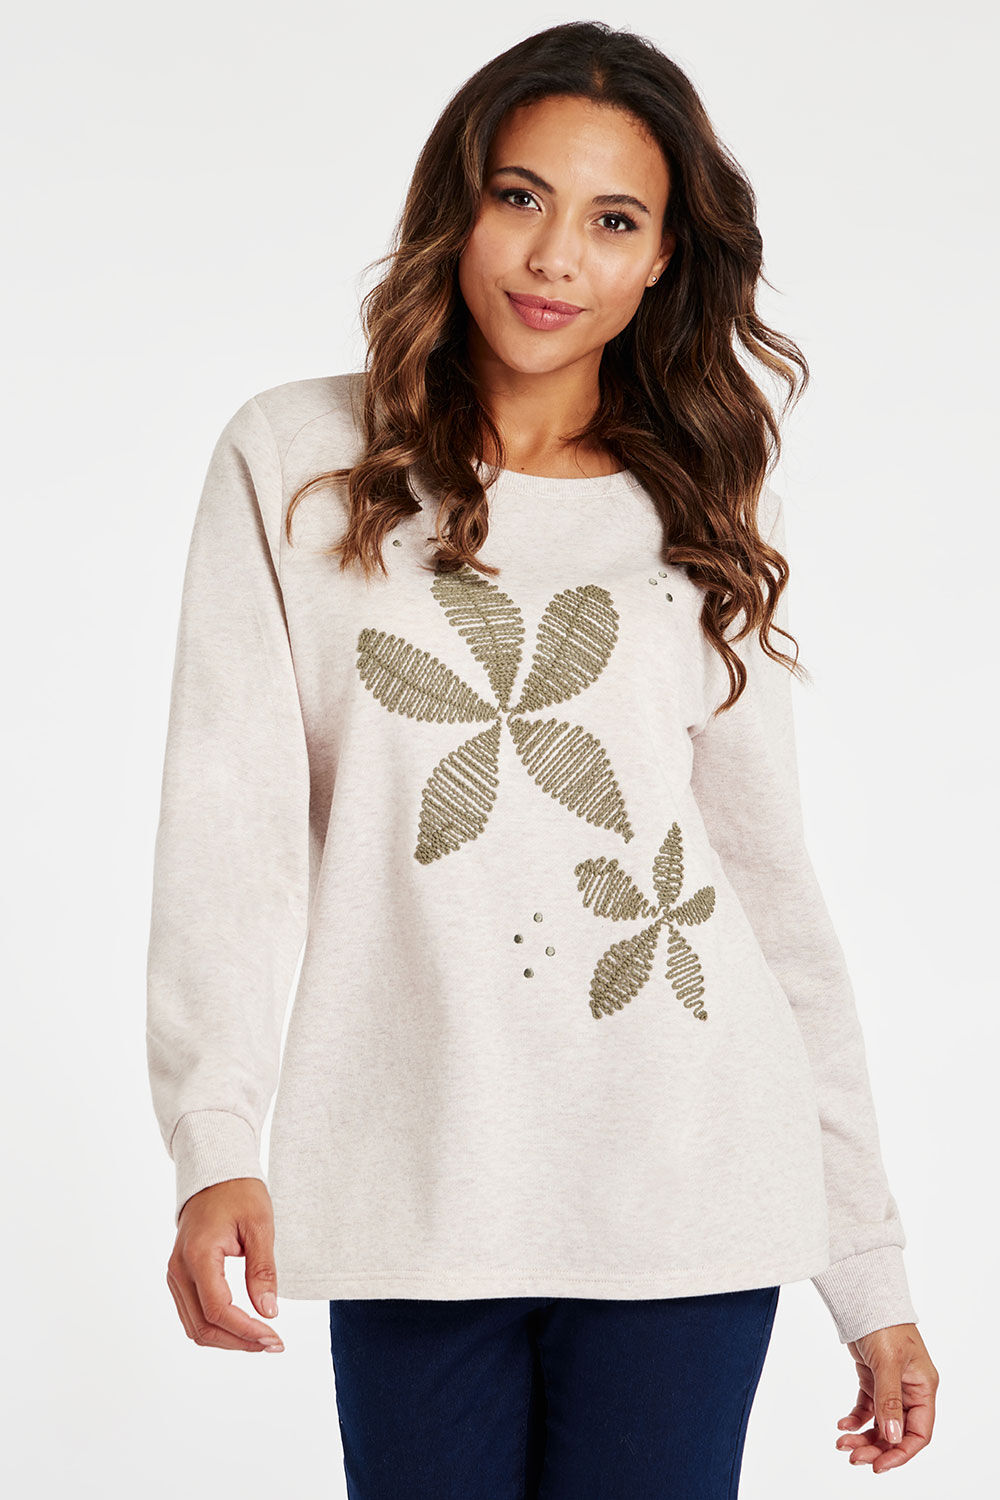 Bonmarche Natural Long Sleeve Flower Embroidered Sweatshirt, Size: 26